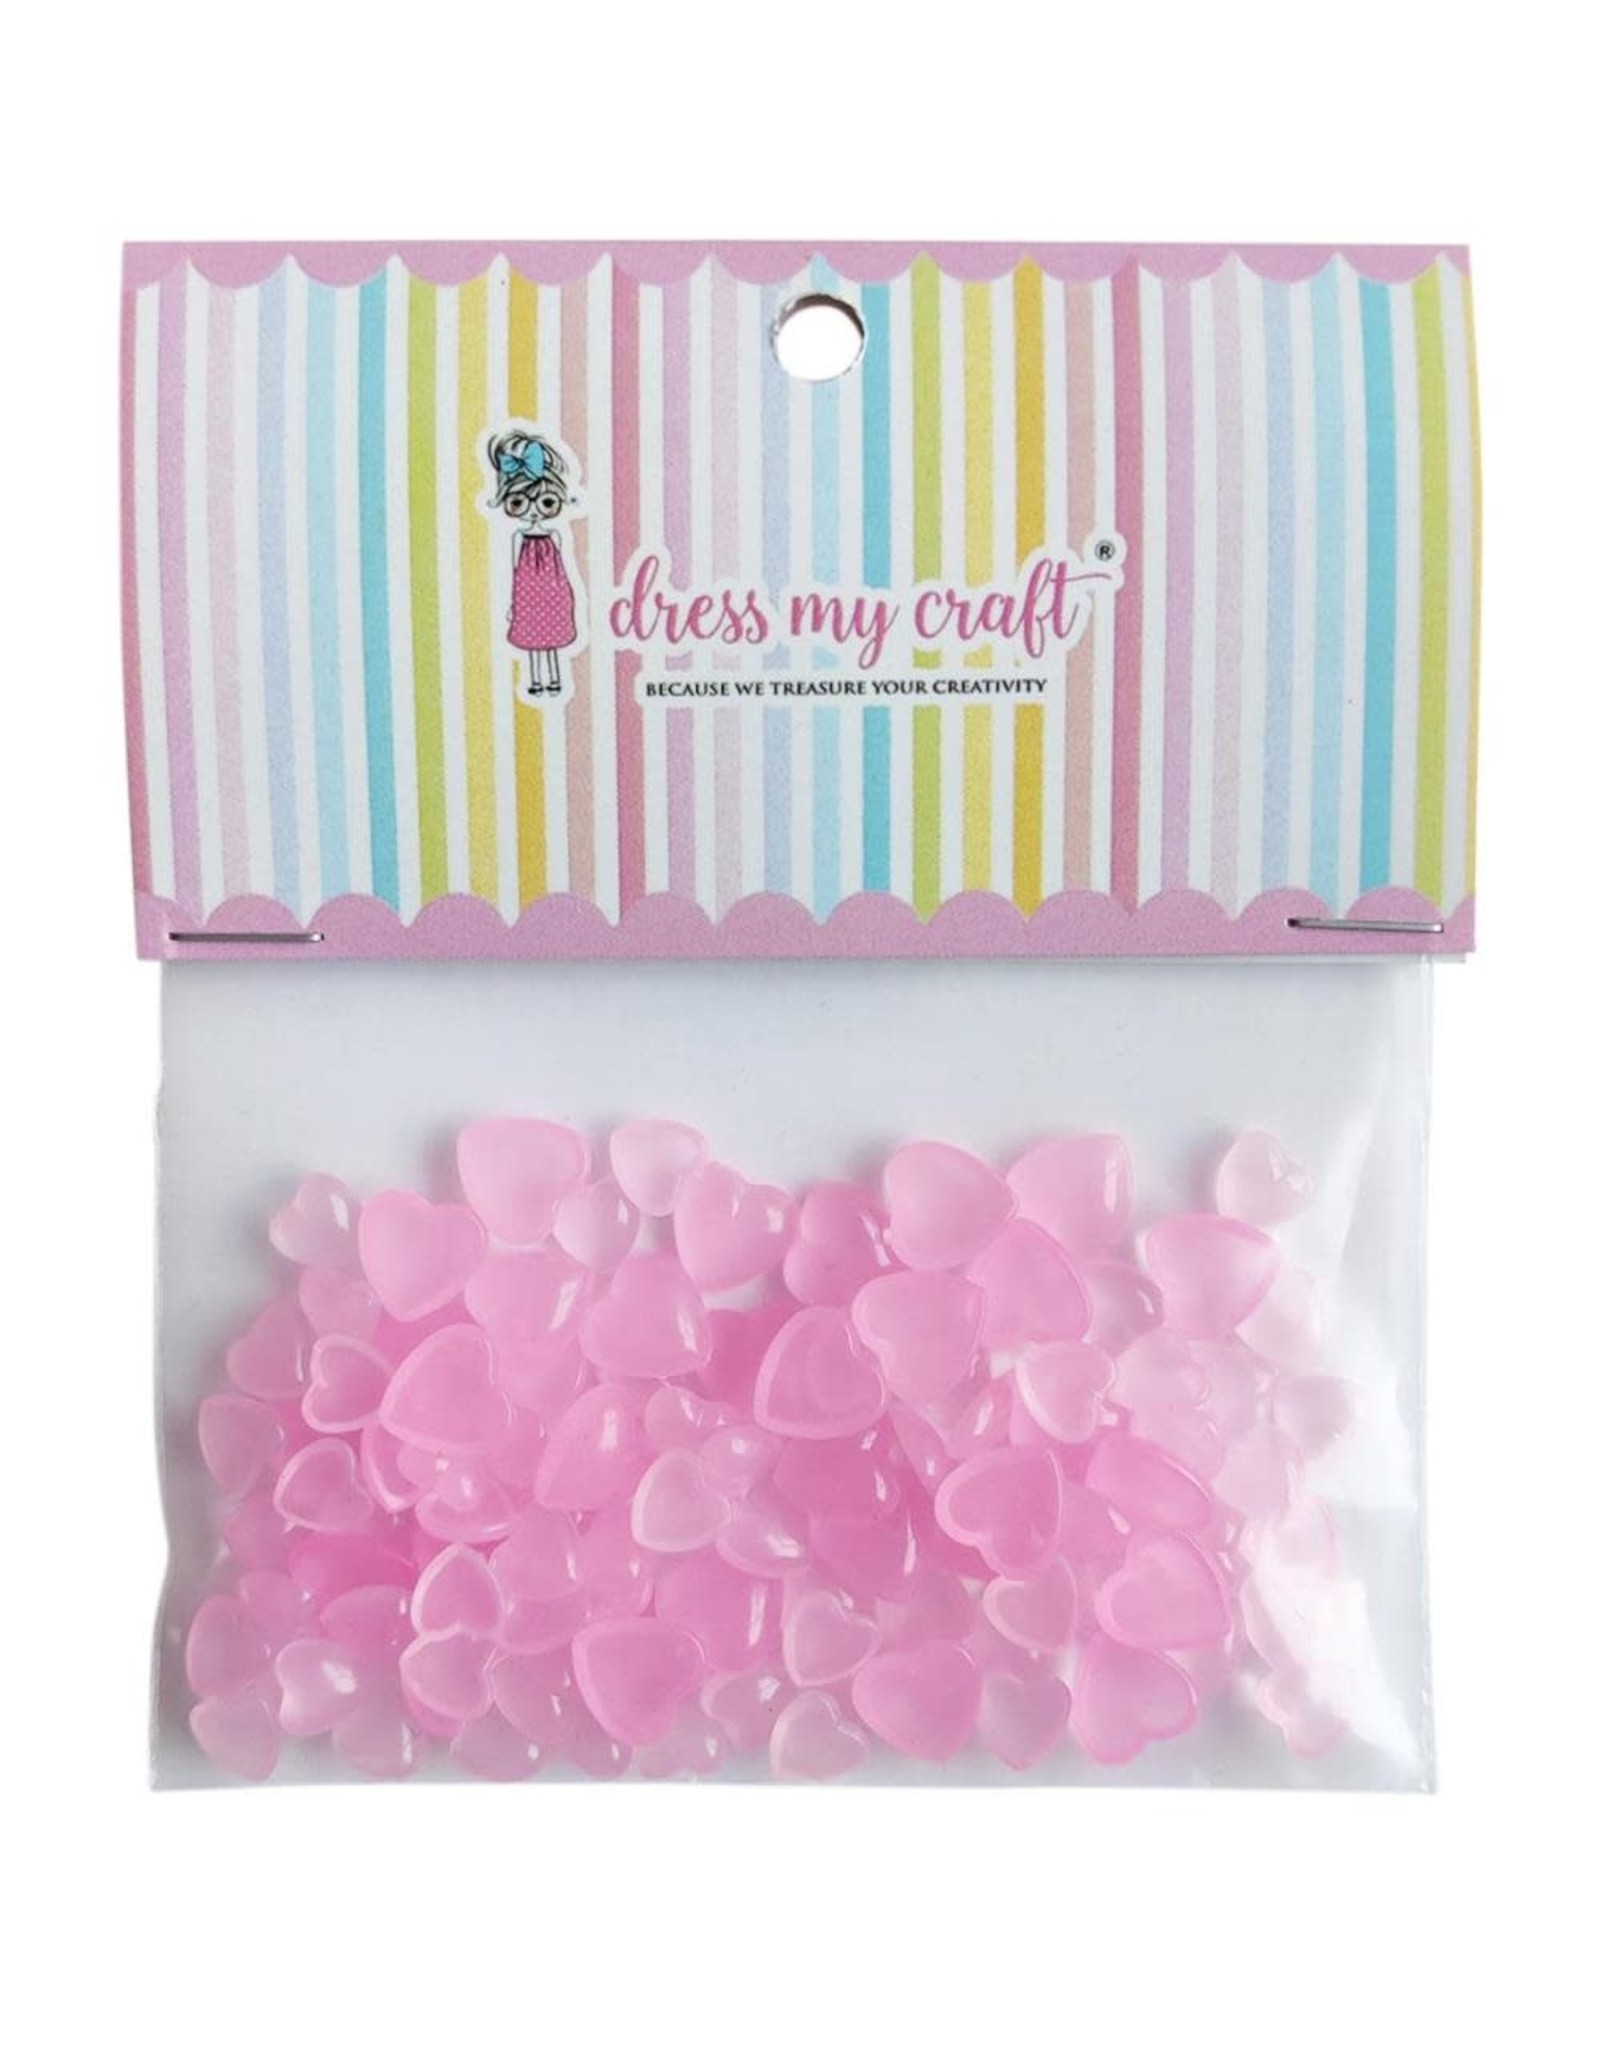 DRESS MY CRAFT WATER DROPLETS EMBELLISHMENTS - PASTEL PINK HEARTS